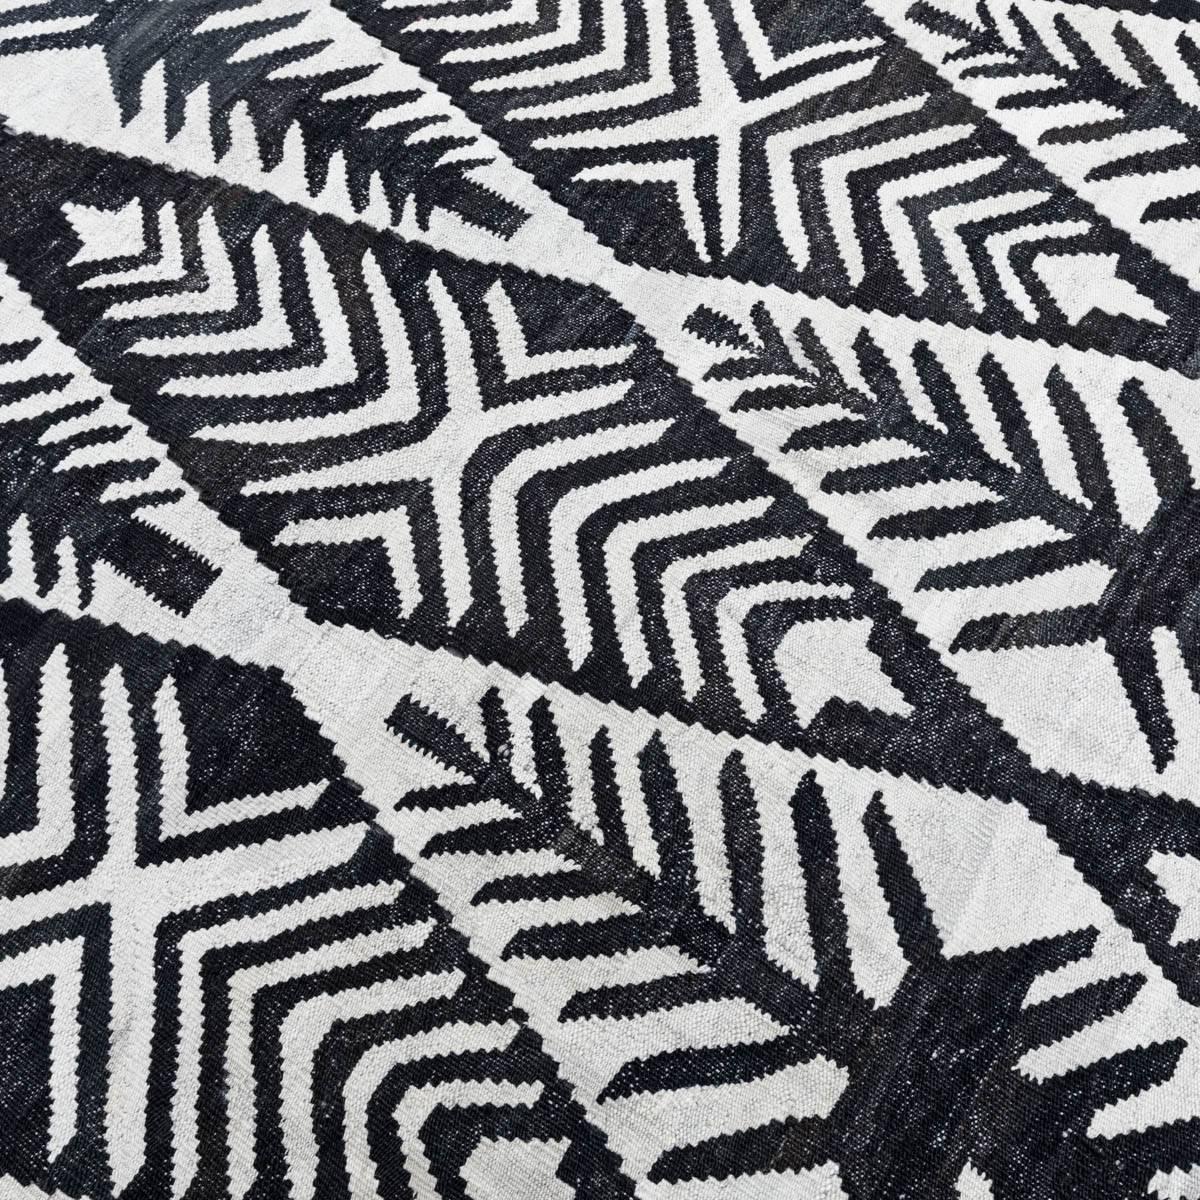 Afghan Contemporary Handmade Flat-Weave Black and White African Collection Rug